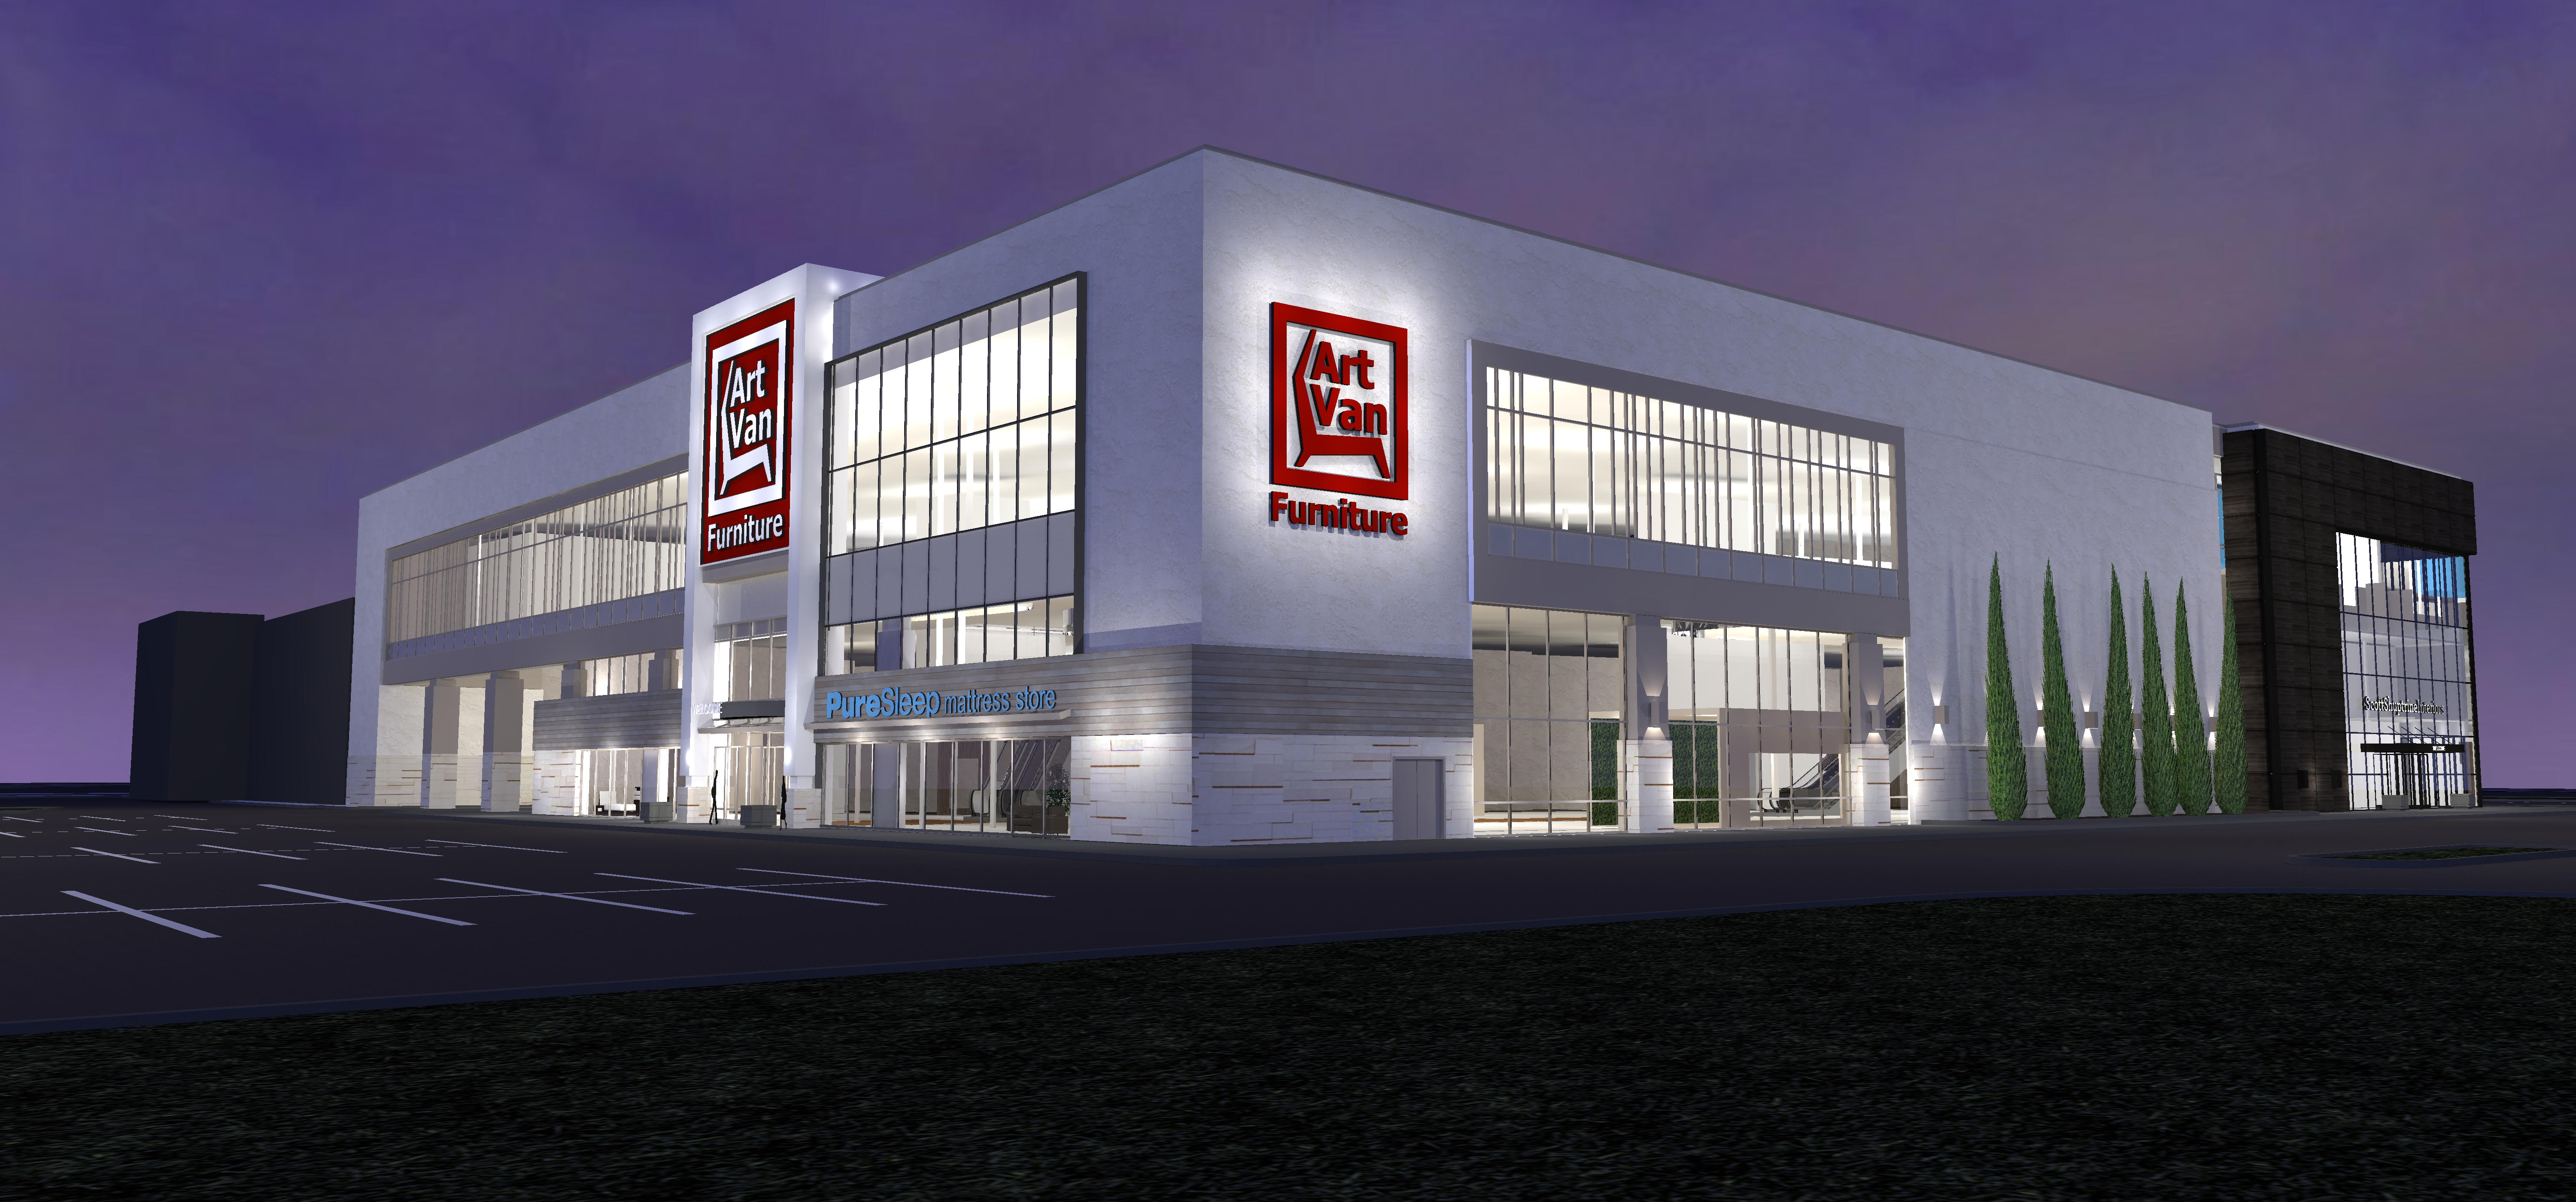 Art Van Furniture largest of new stores coming to Downers Grove